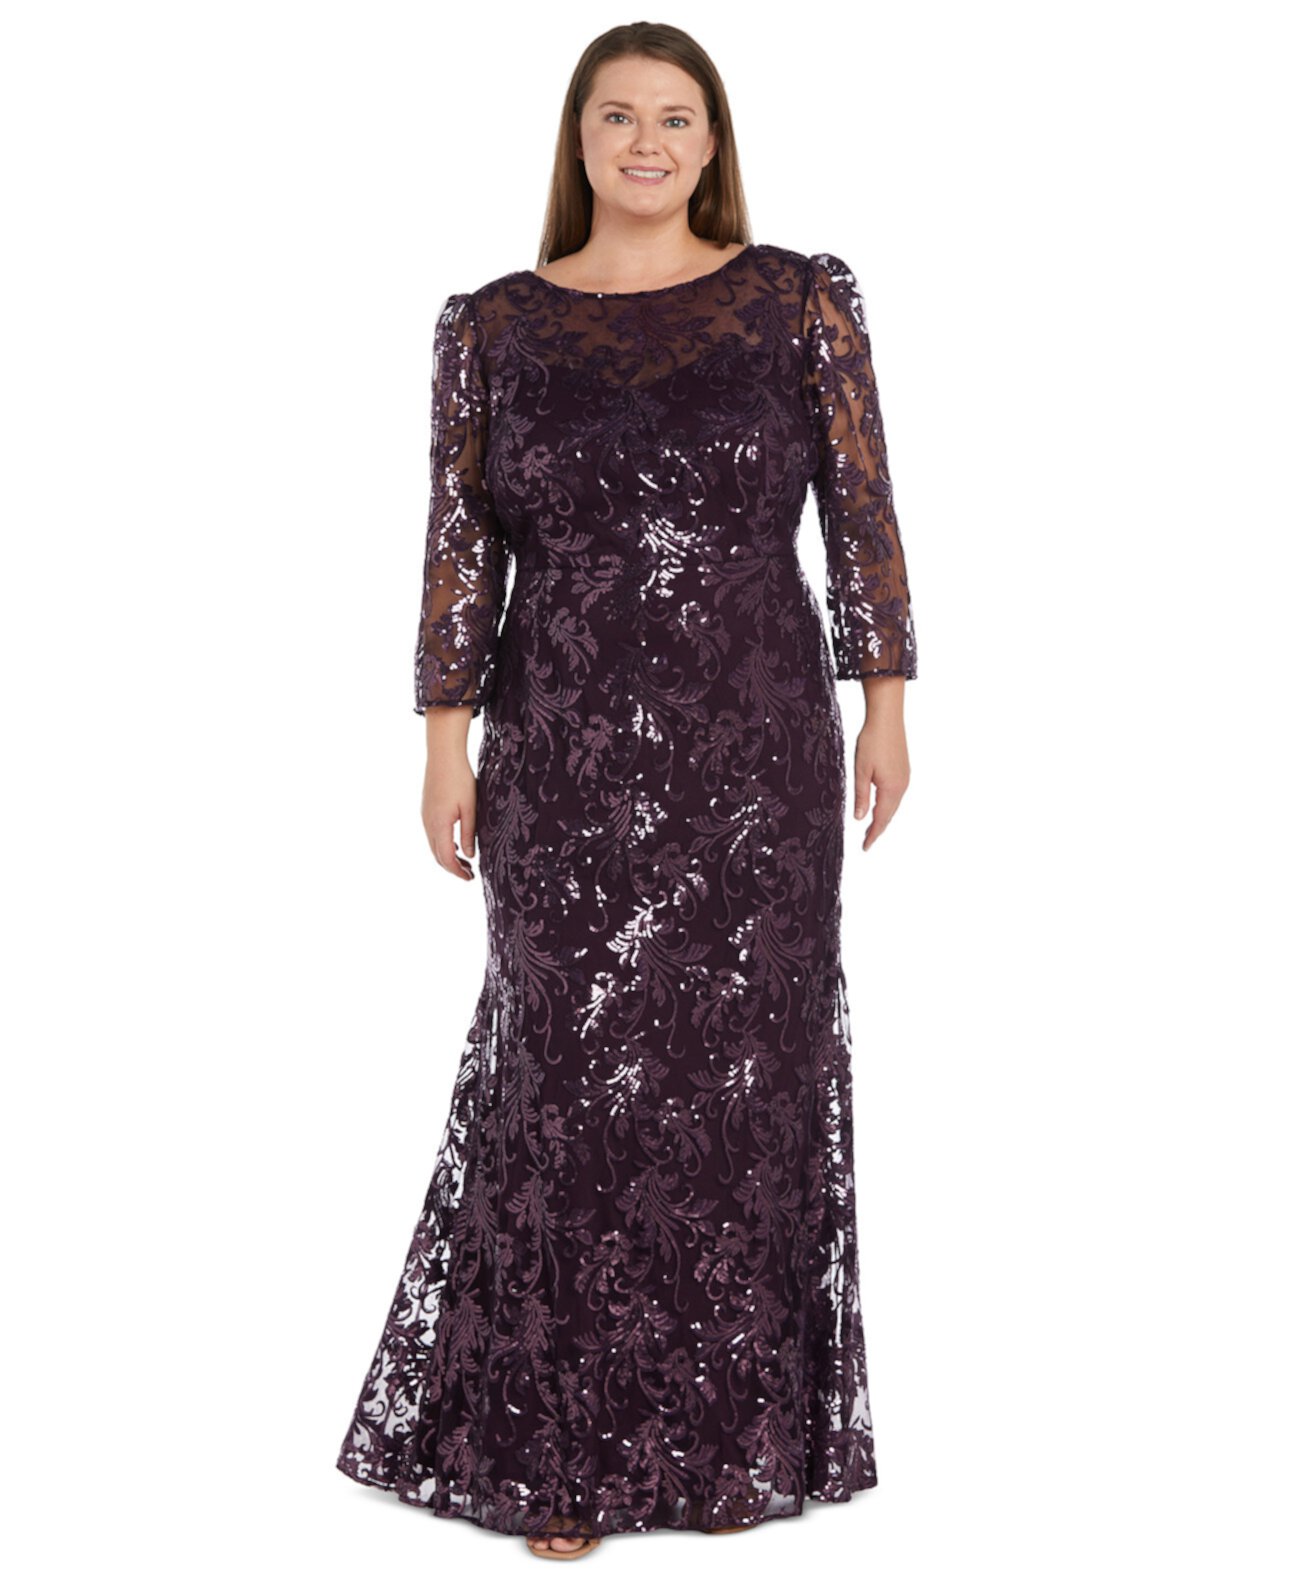 Plus Size Sequined Embroidered Gown R & M Richards